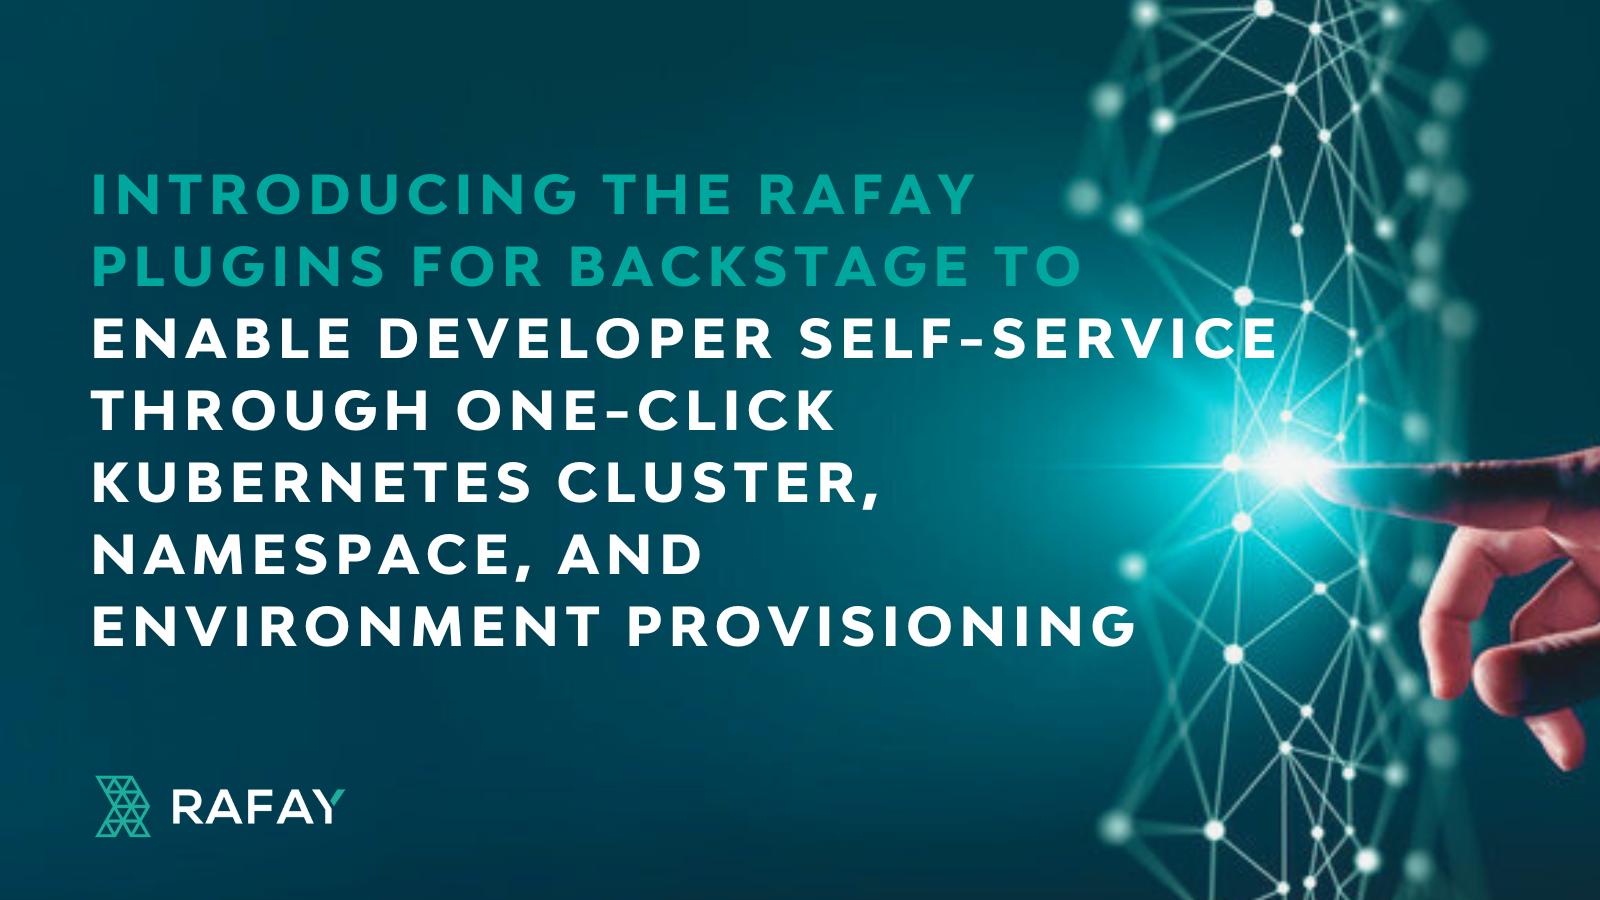 Image for Introducing the Rafay Plugins For Backstage to Enable Developer Self-Service Through One-Click Kubernetes Cluster, Namespace, and Environment Provisioning